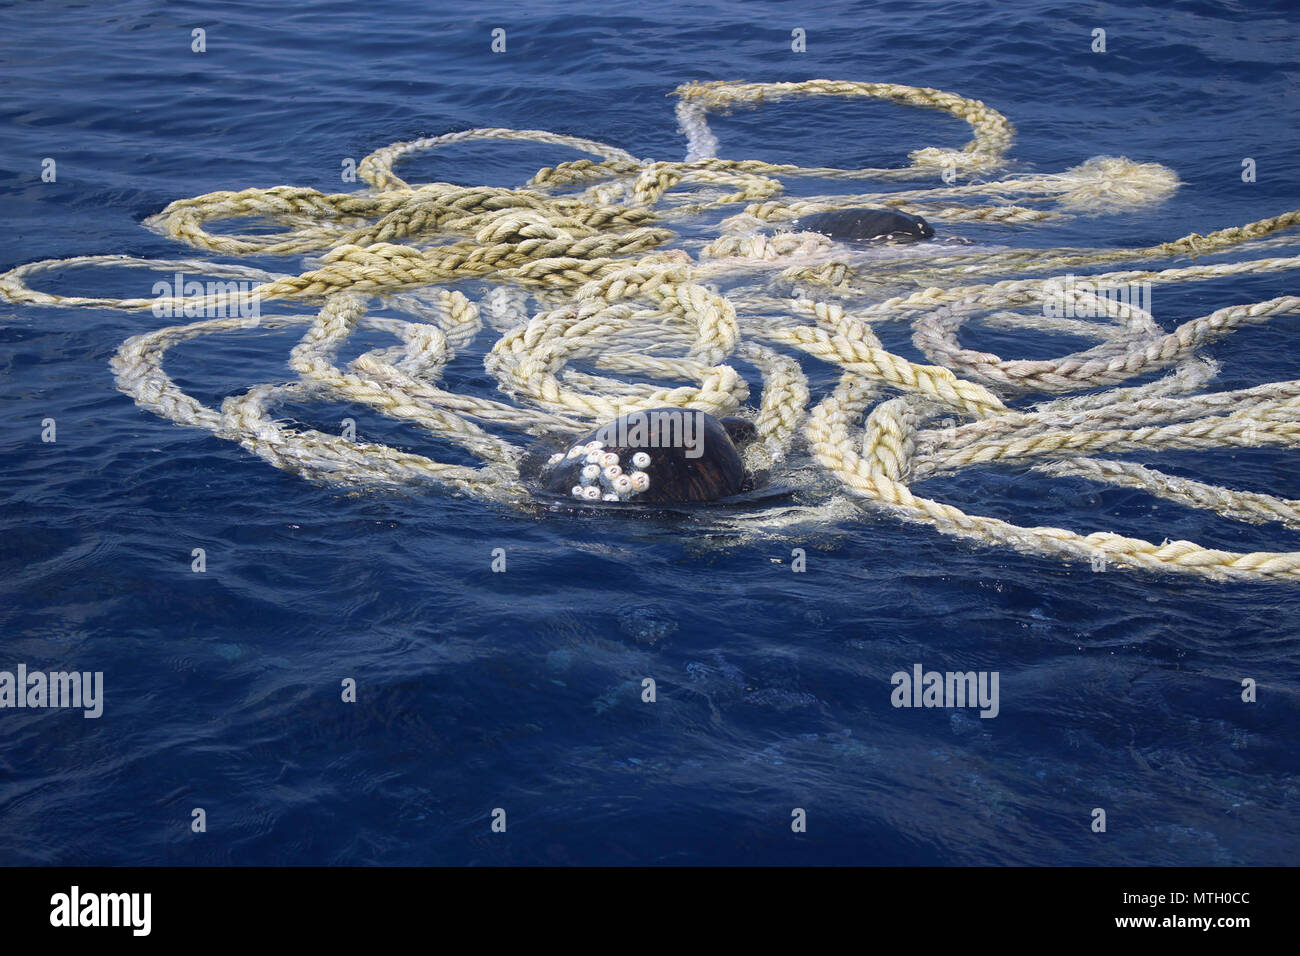 A sea turtle is entangled in a mass of fishing gear and garbage in the Eastern Pacific Ocean before being released by the crew of Coast Guard Cutter Valiant, April 23, 2017.    The crew freed one baby and three adult olive ridley sea turtles. Stock Photo